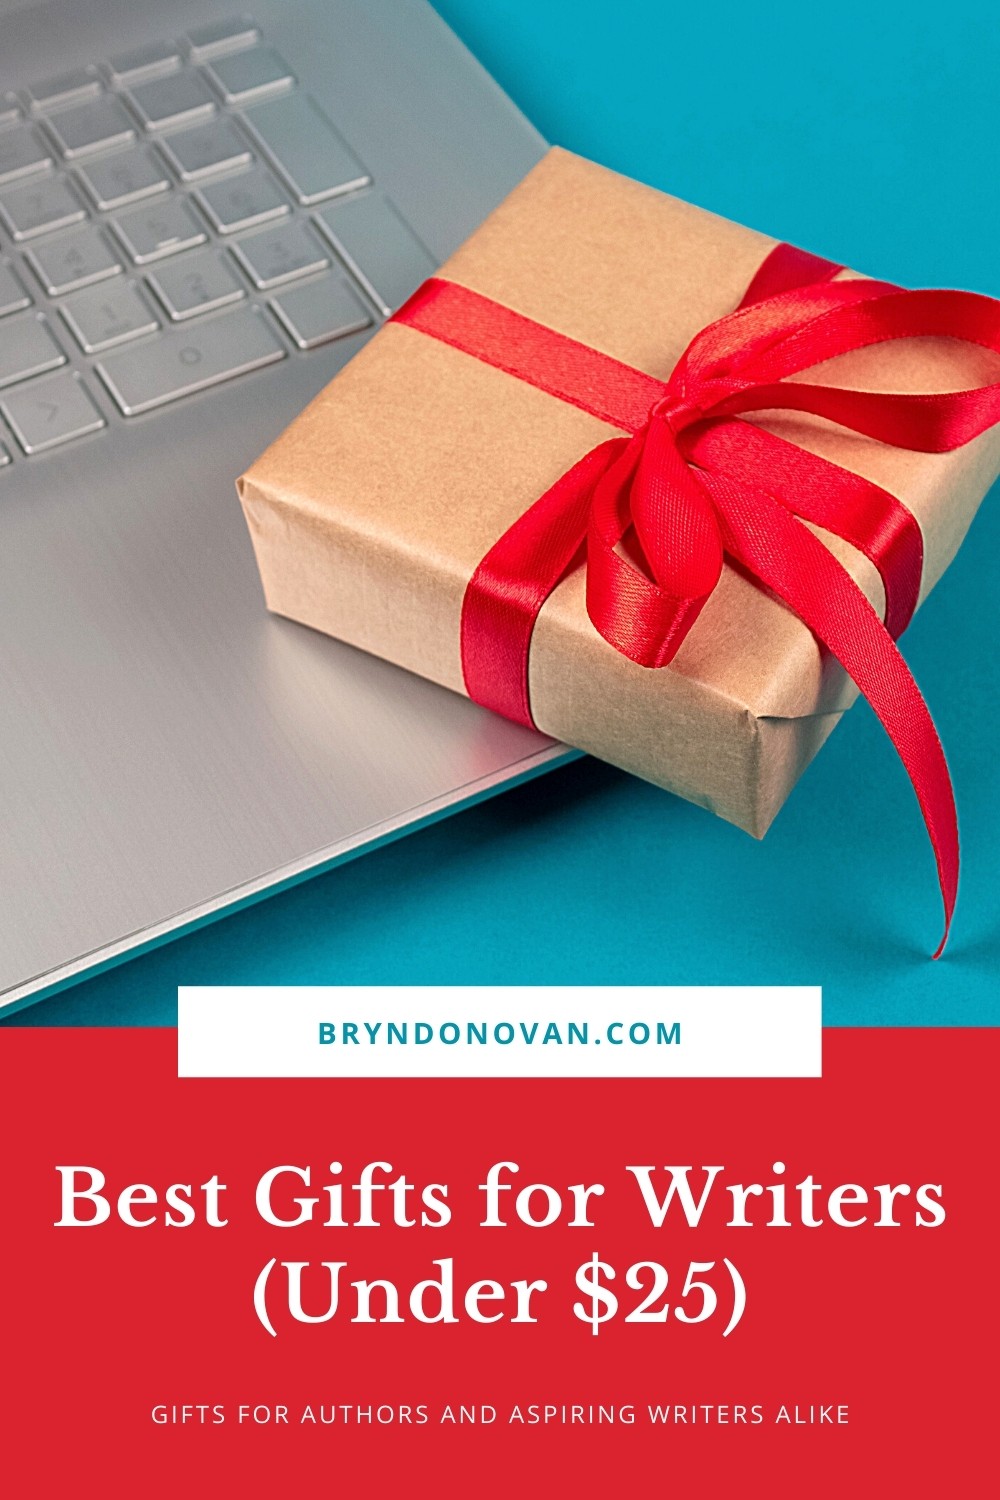 wrapped gift on computer keyboard. Text: BEST GIFTS FOR WRITERS | gifts for authors and aspiring writers alike 